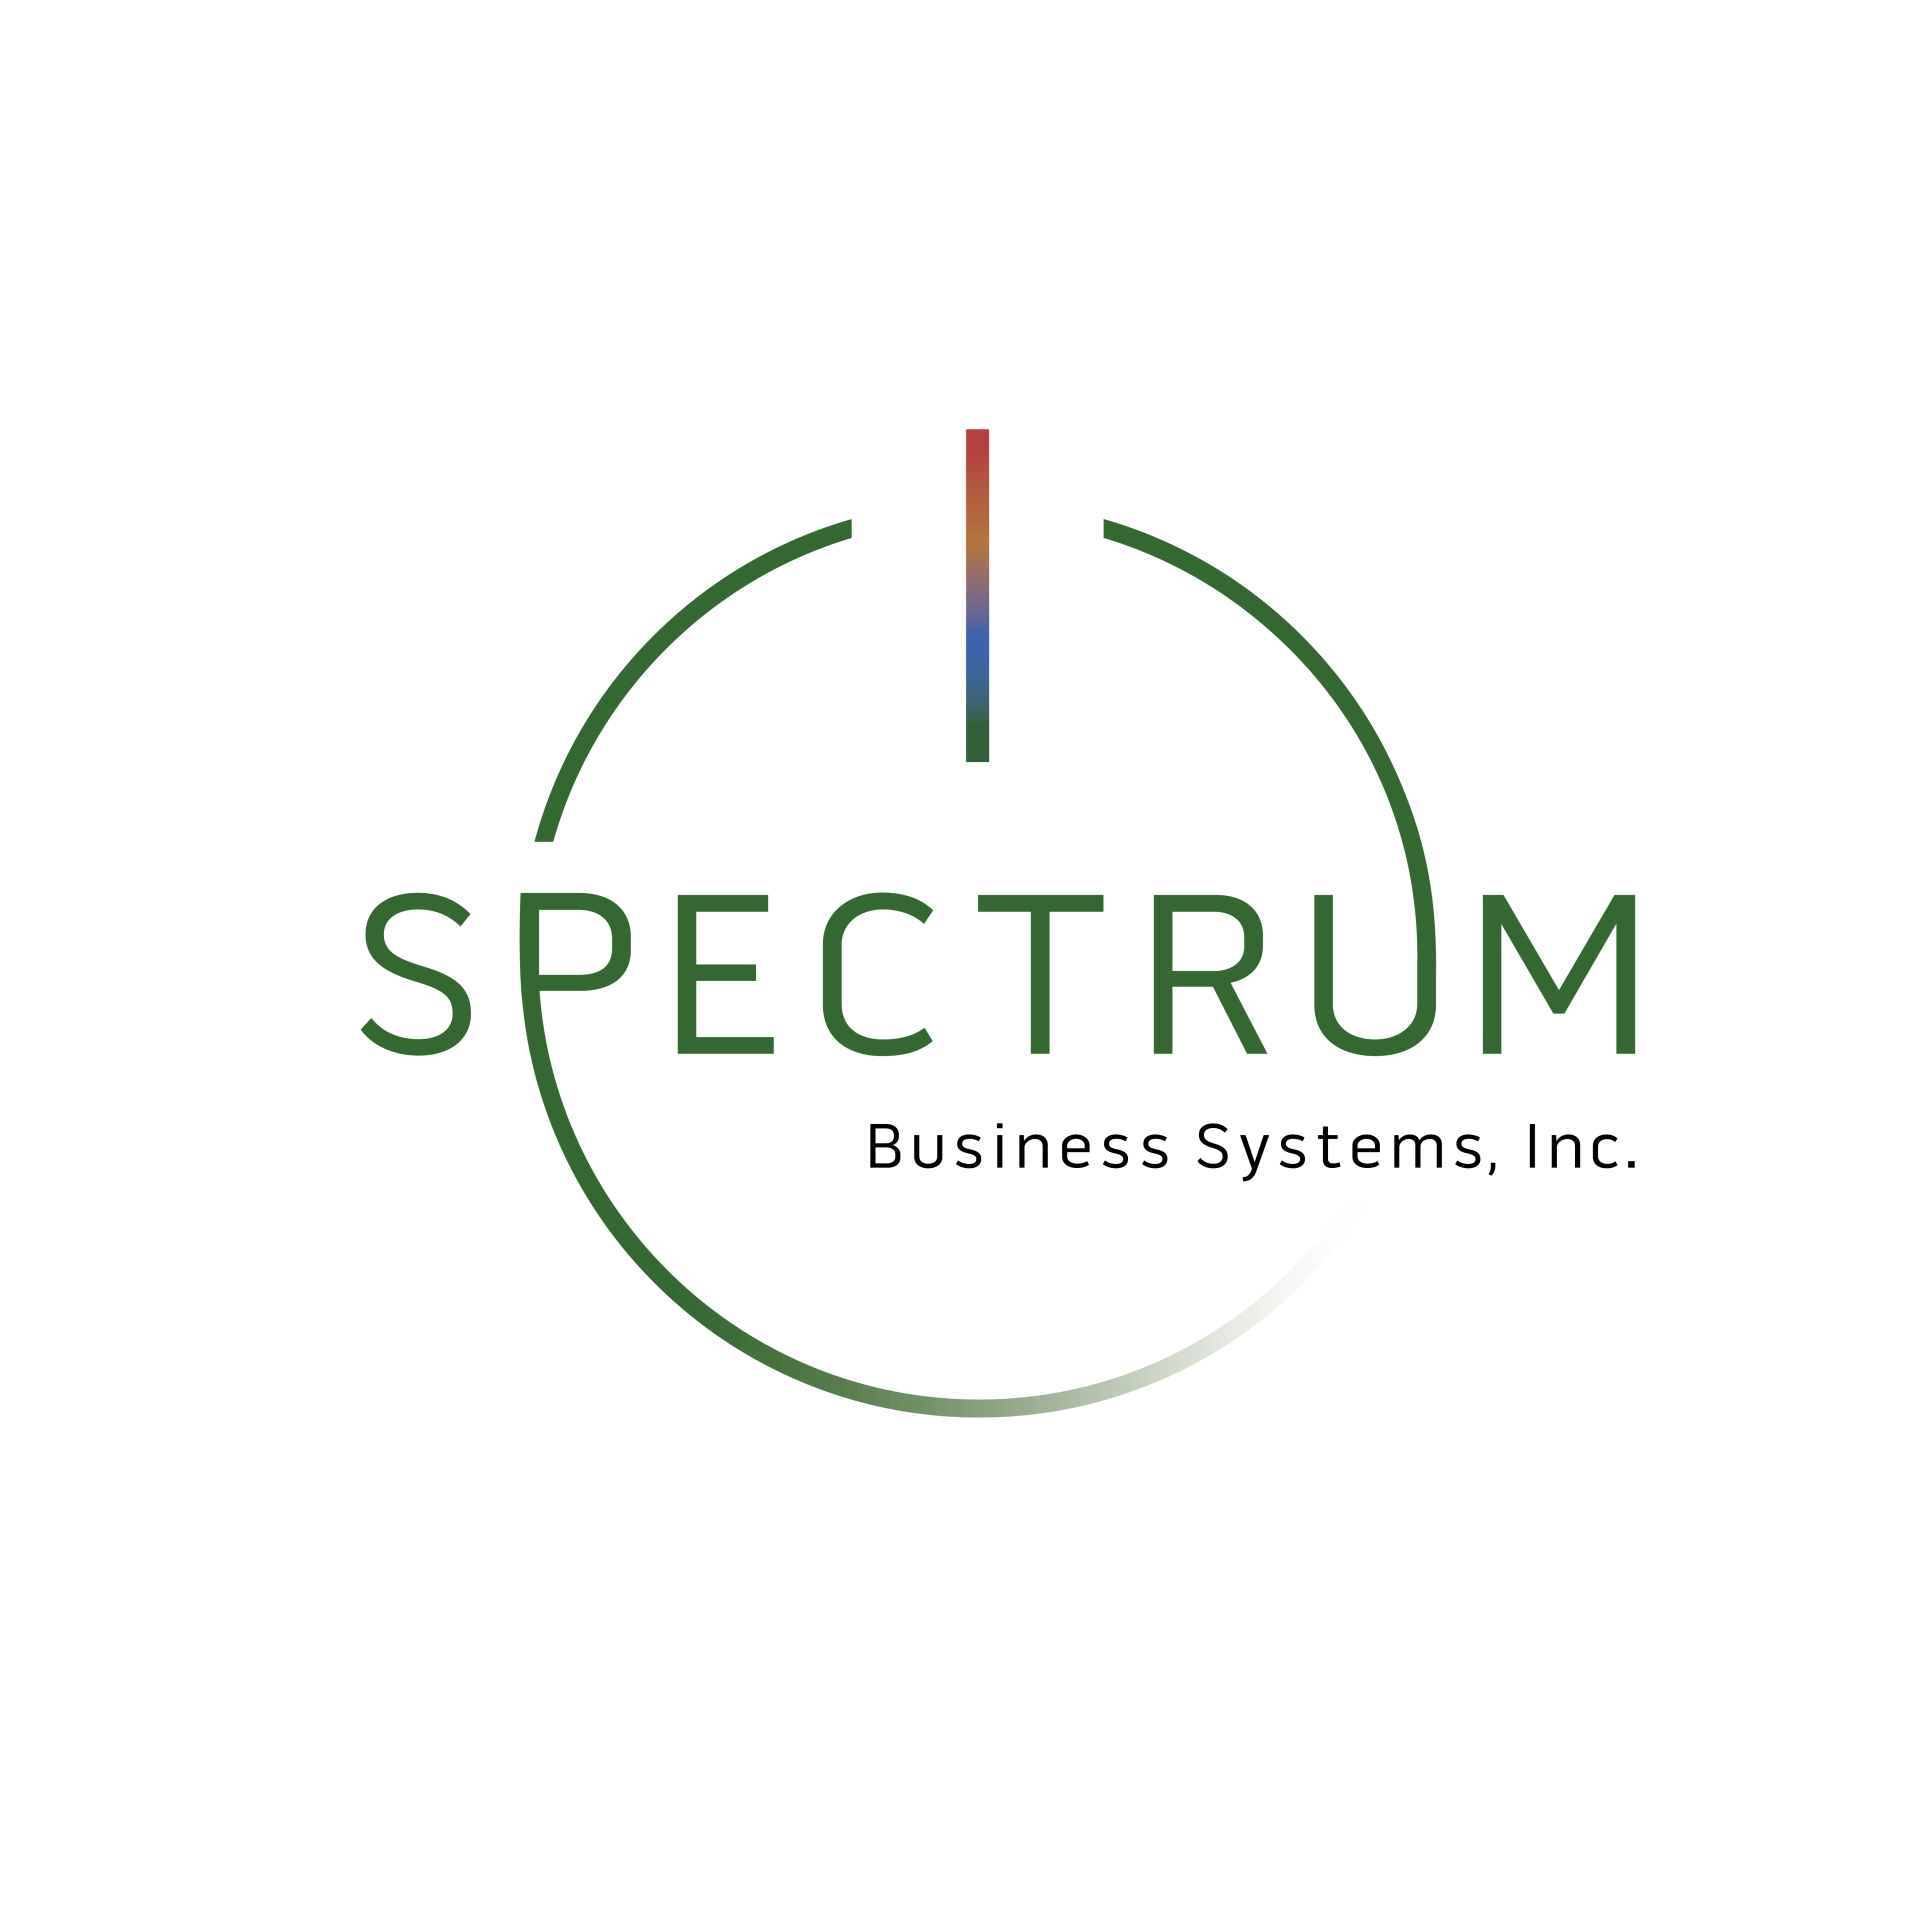 Spectrum Business Systems, Inc.